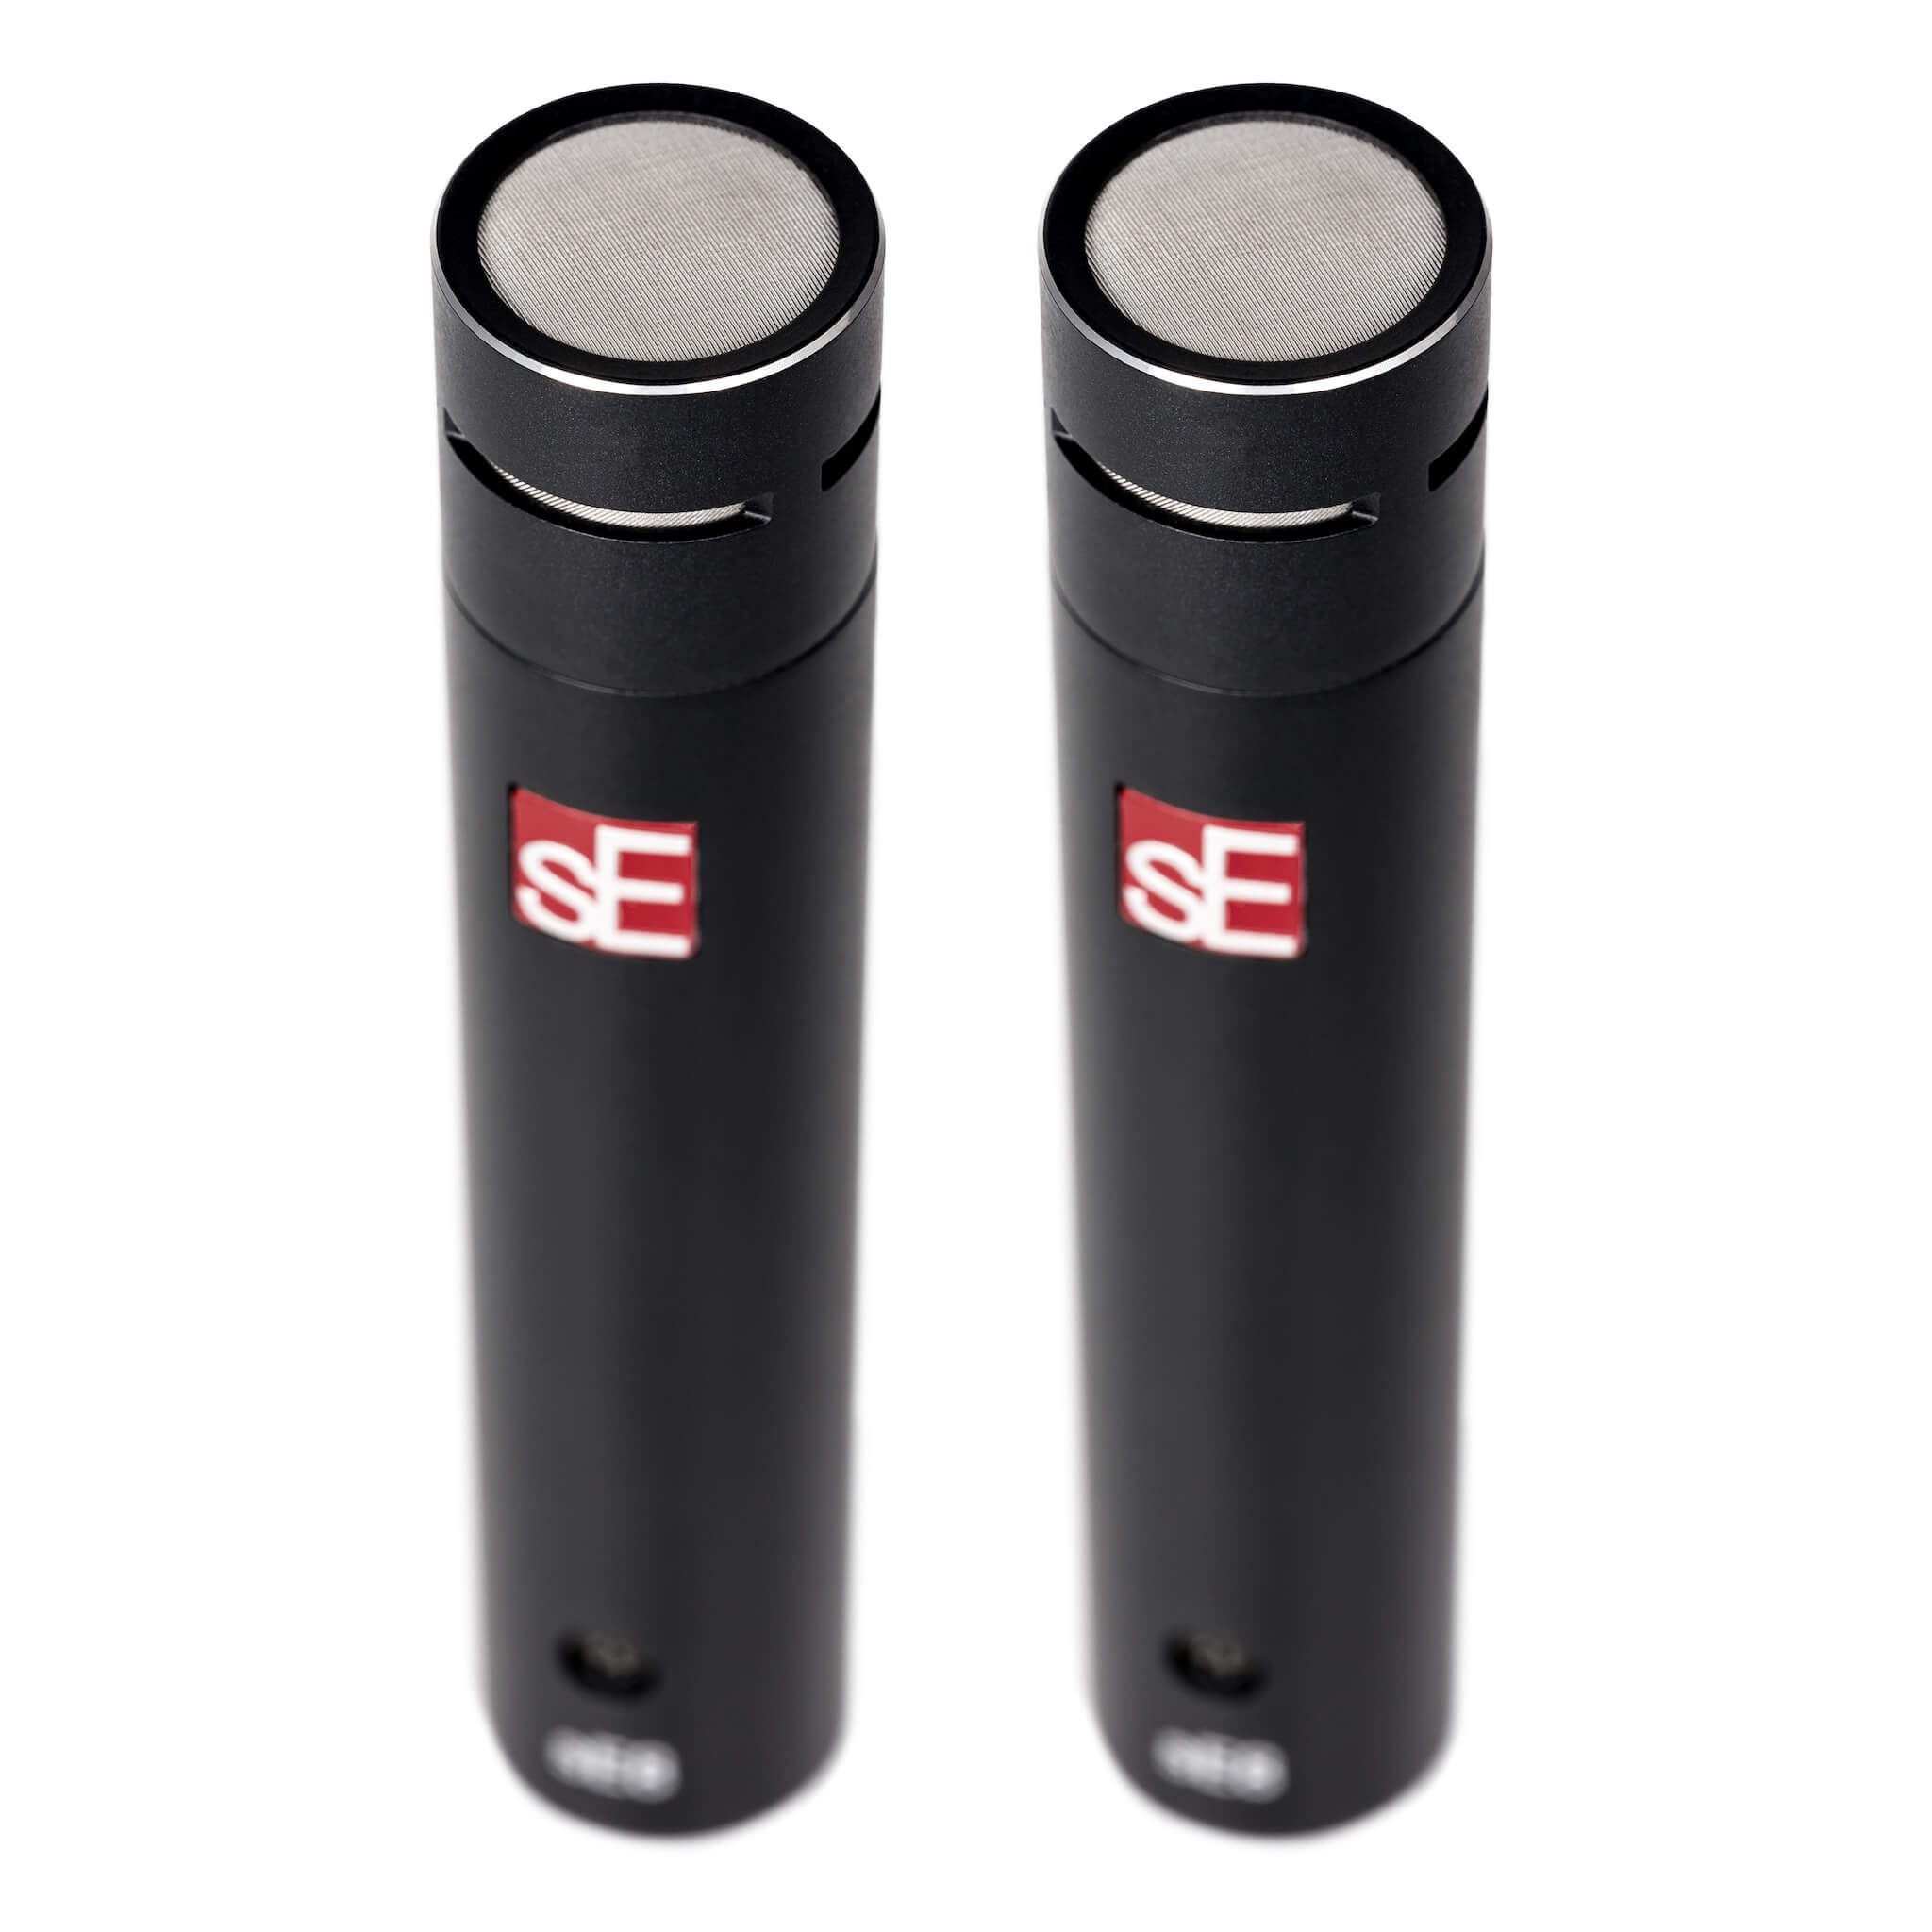 sE Electronics sE8 SP - Factory Matched Pair of sE8 Microphones and Case